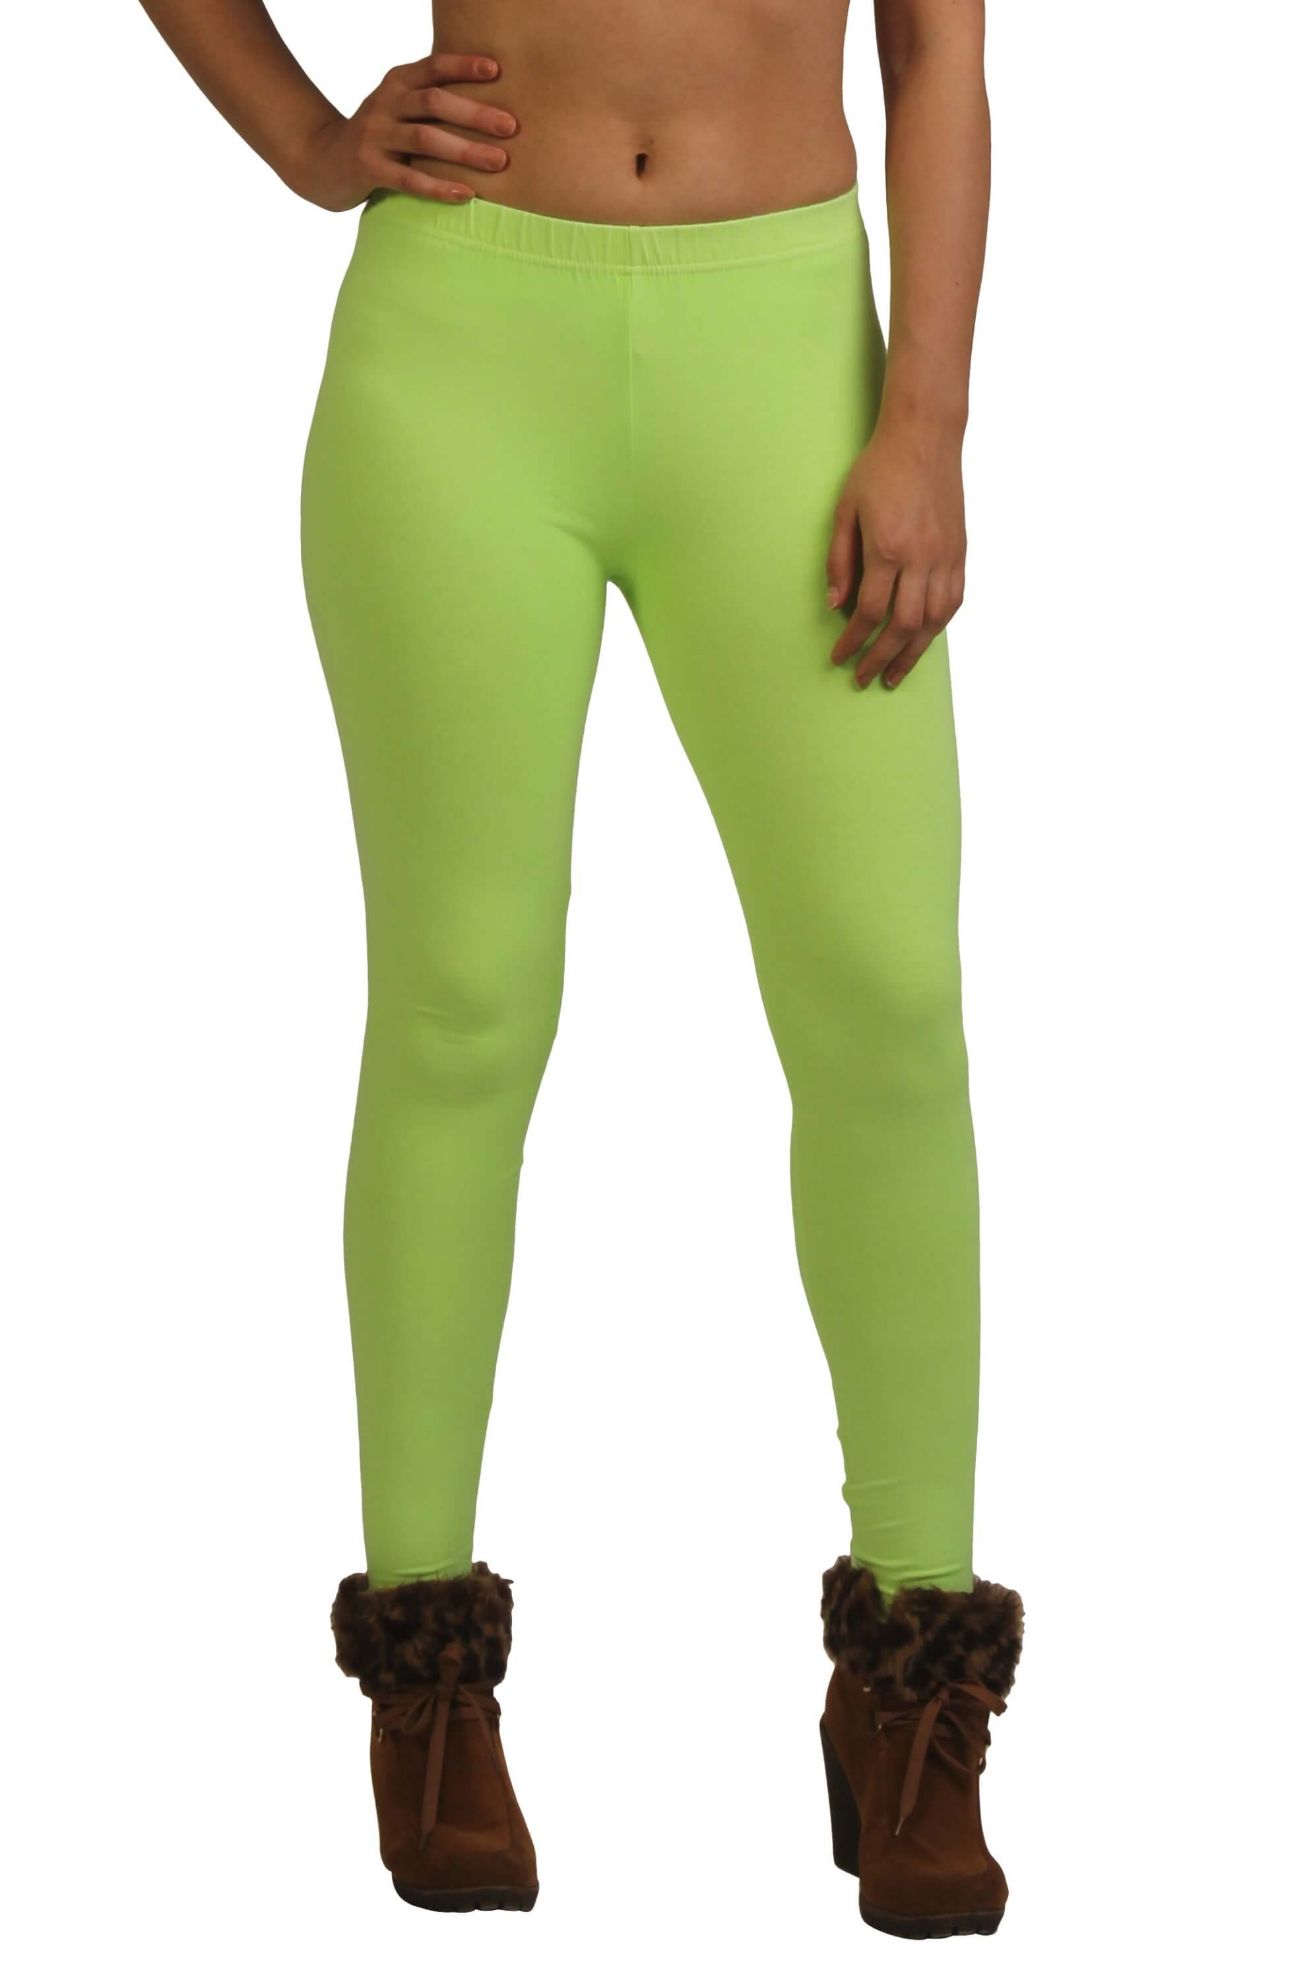 https://frenchtrendz.com/images/thumbs/0000434_frenchtrendz-cotton-spandex-neon-green-ankle-leggings.jpeg